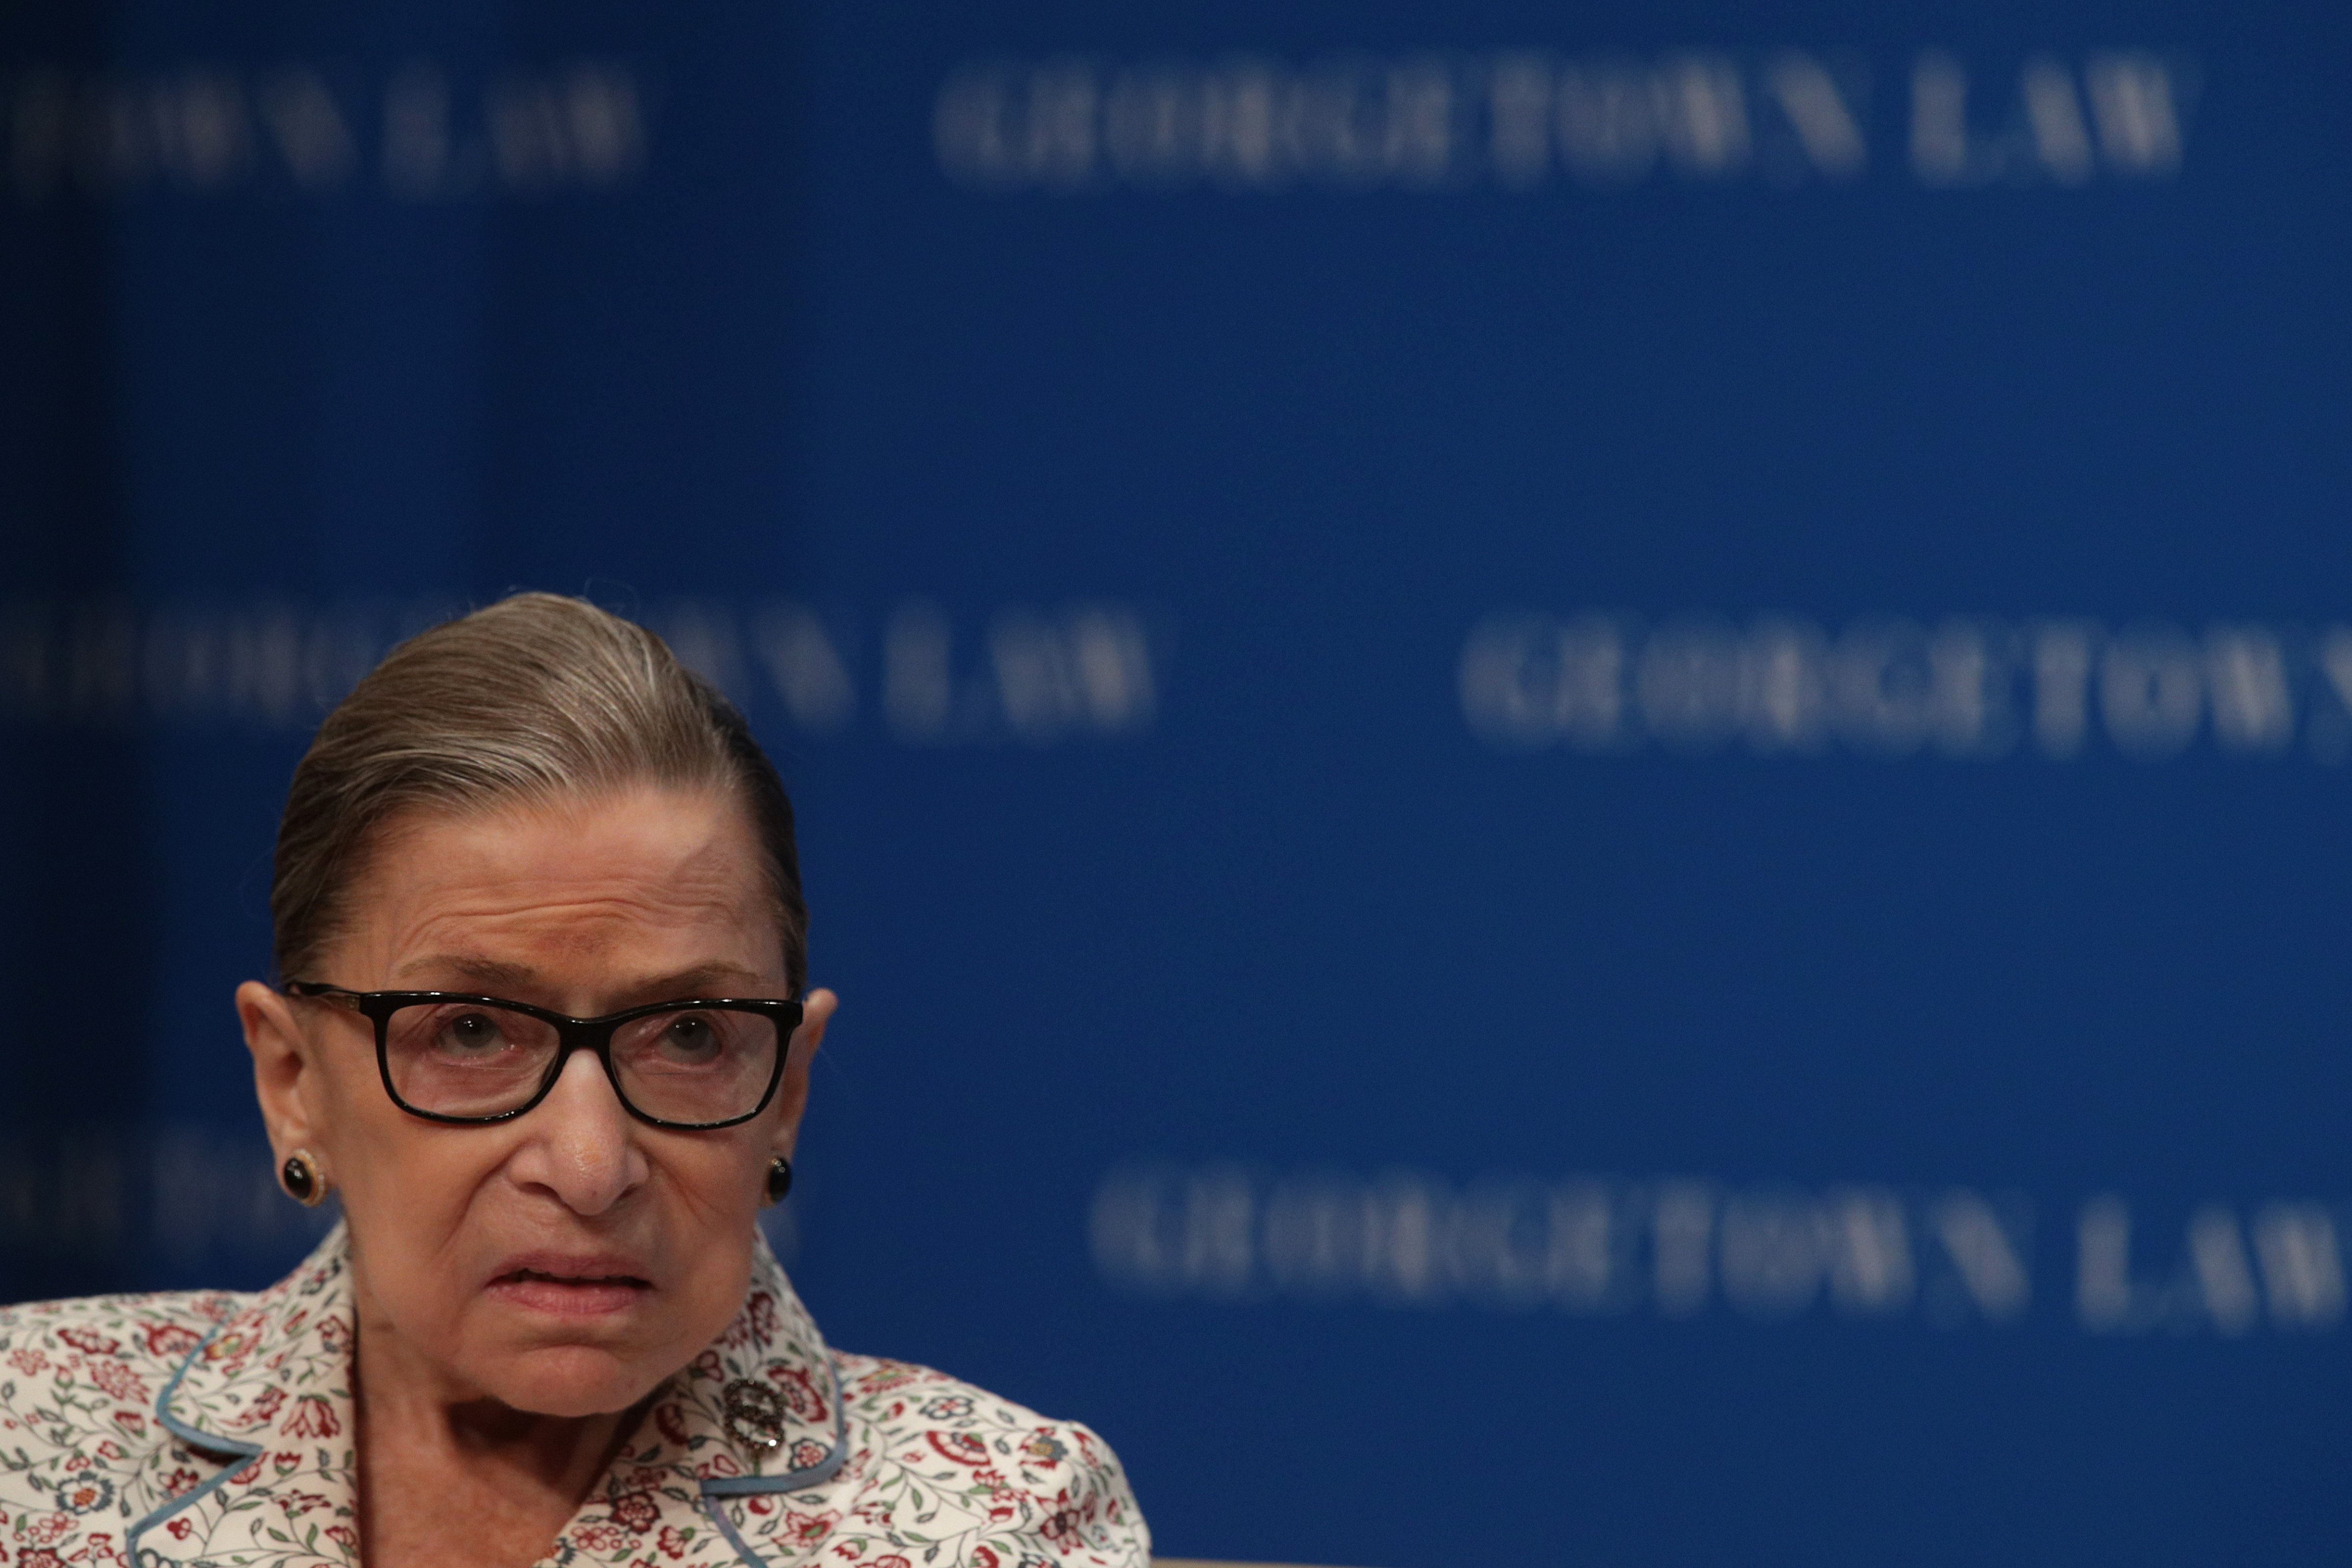 U.S. Supreme Court Justice Ruth Bader Ginsburg participates in a discussion at Georgetown University Law Center July 2, 2019 in Washington, DC. (Alex Wong&mdash;Getty Images)